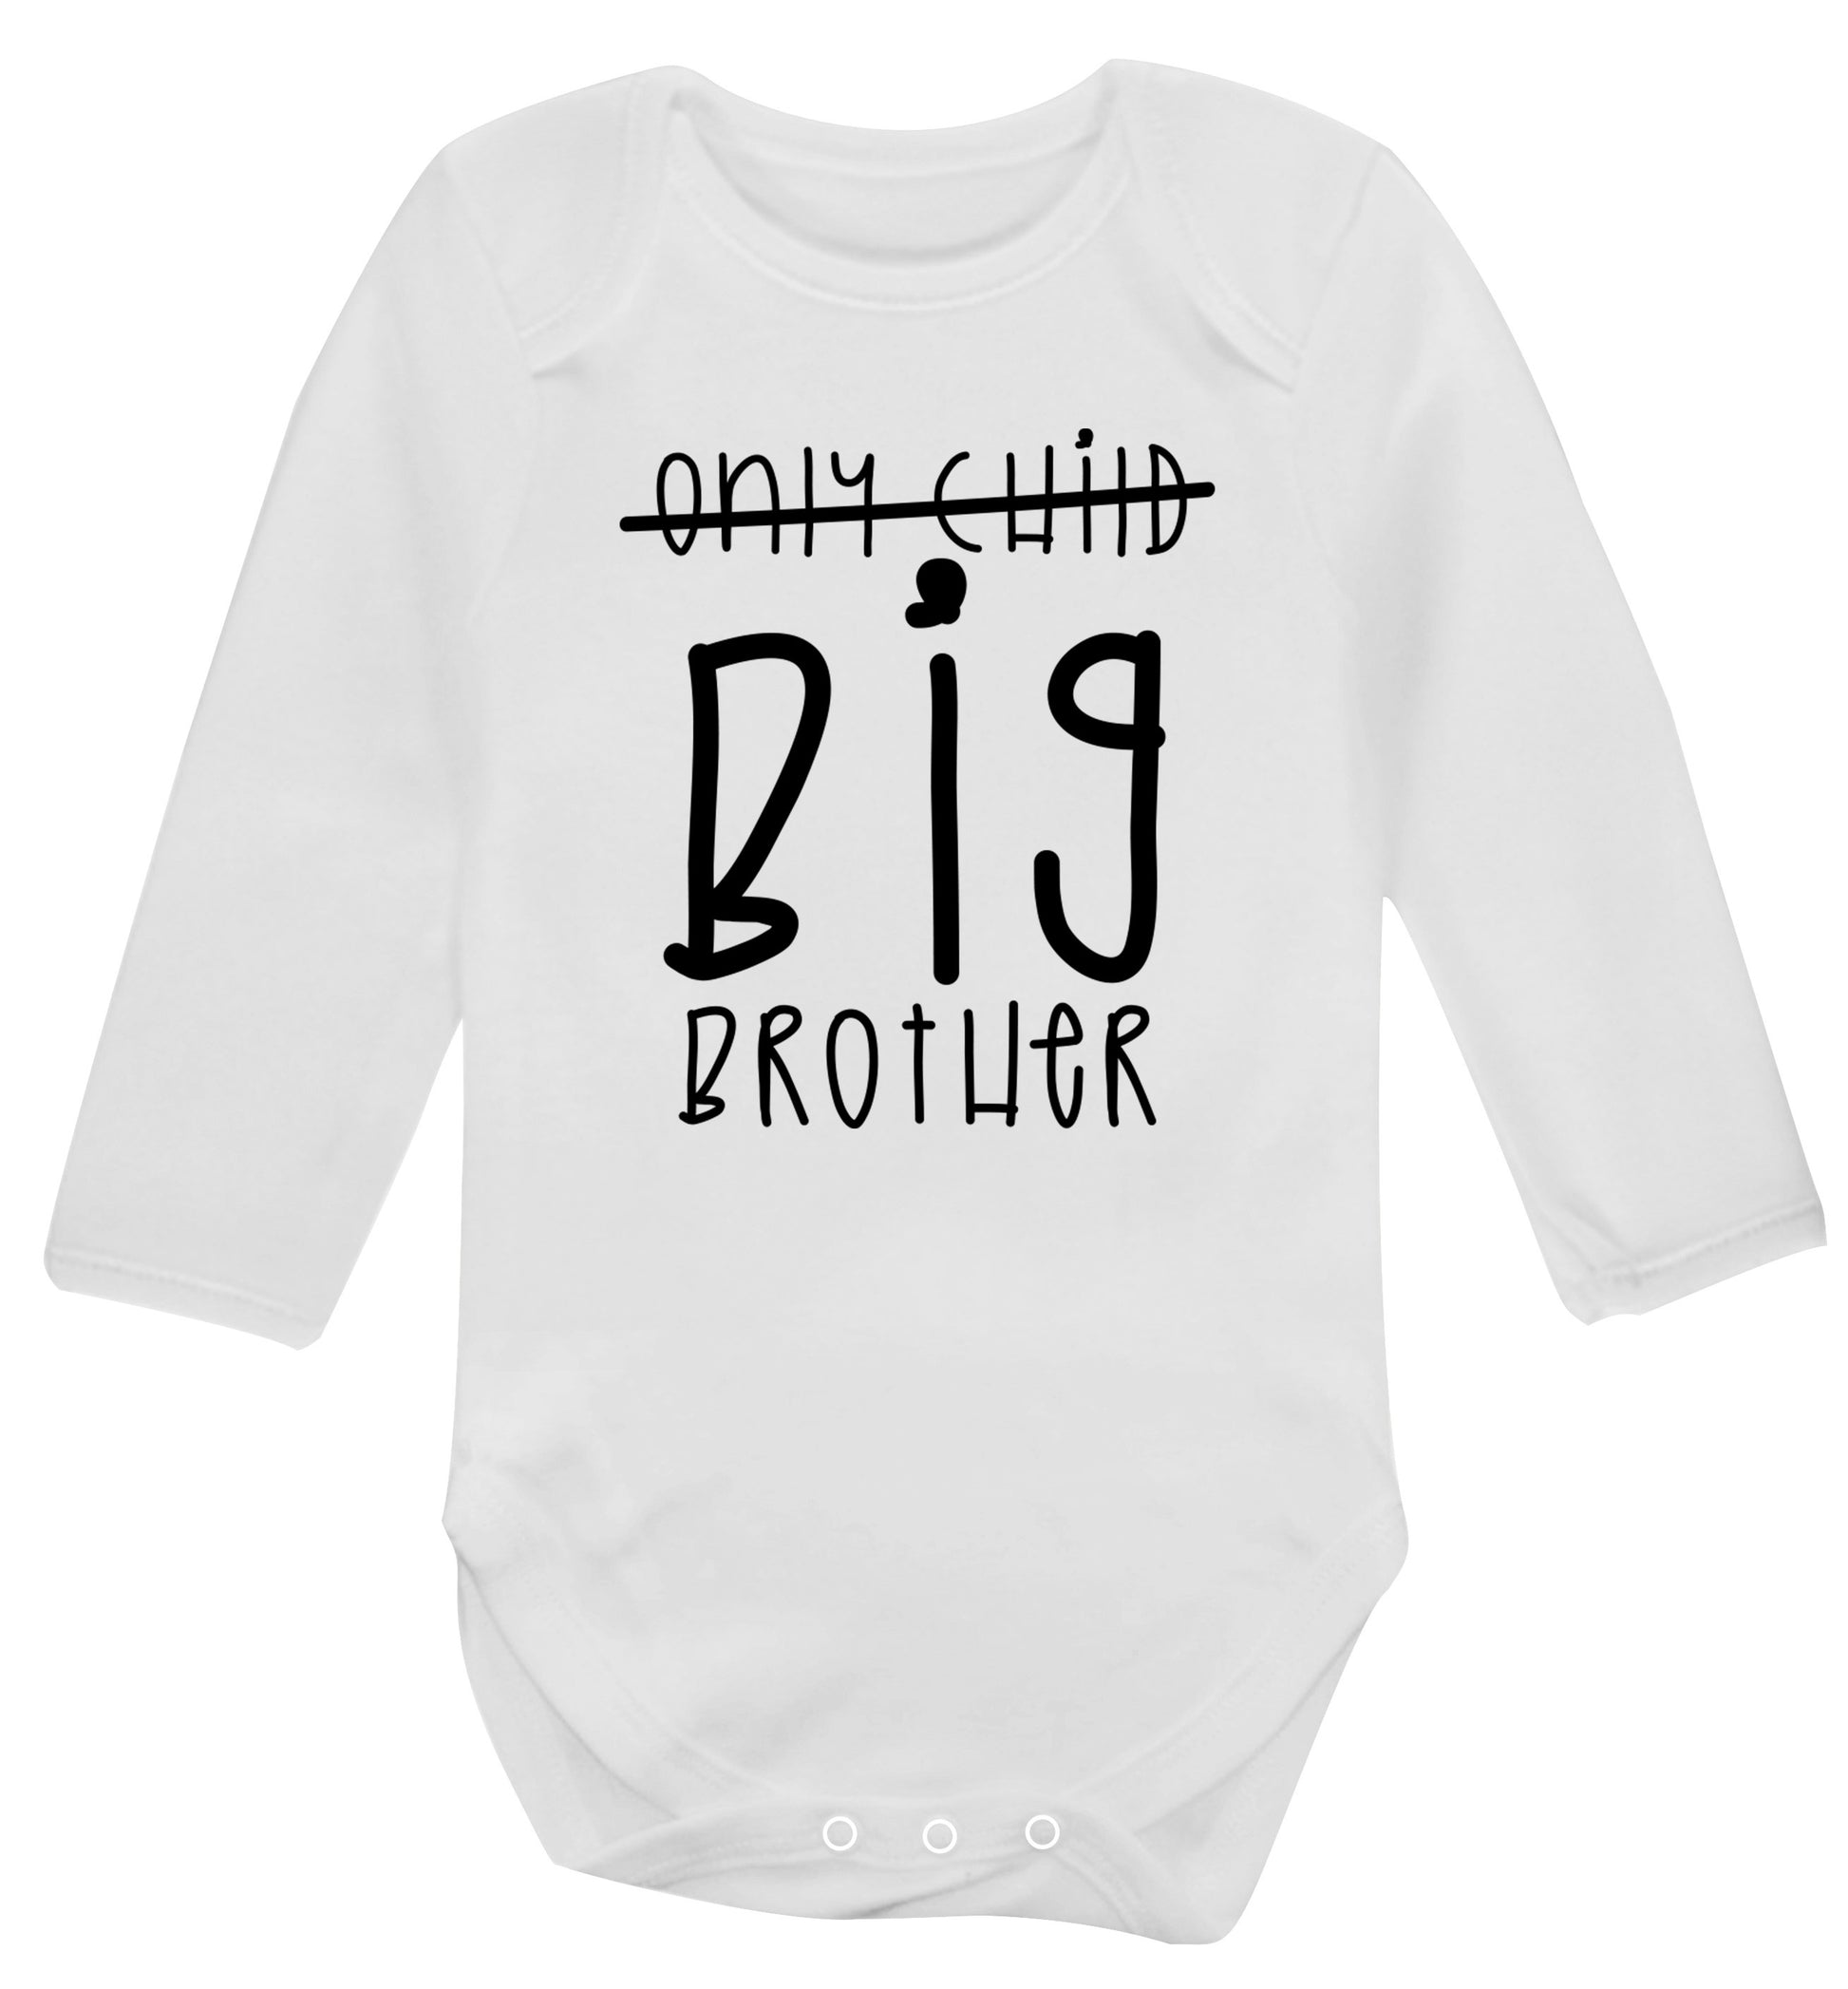 Only child big brother Baby Vest long sleeved white 6-12 months